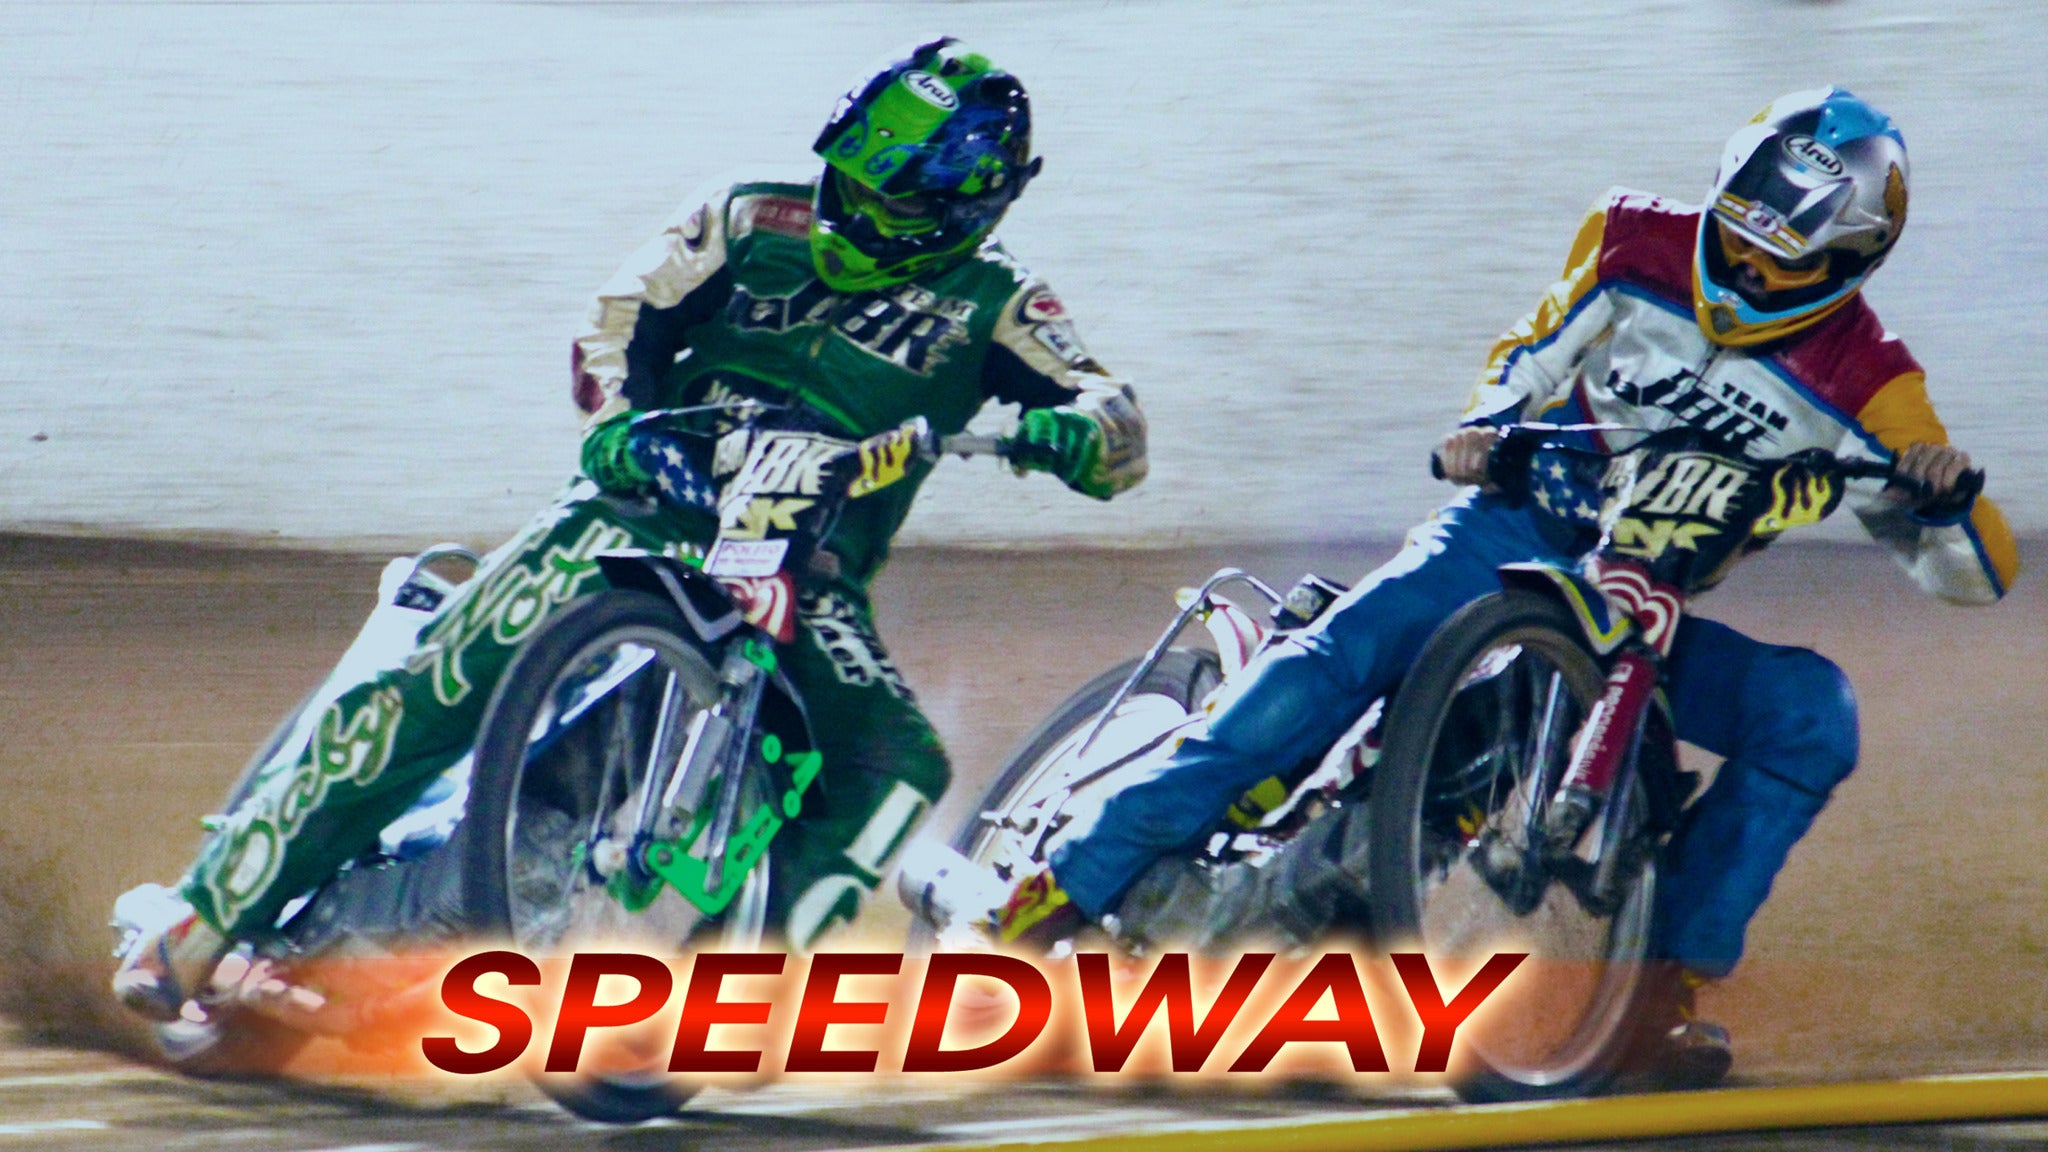 Speedway Fair Derby in Costa Mesa promo photo for Action Sports Arena presale offer code